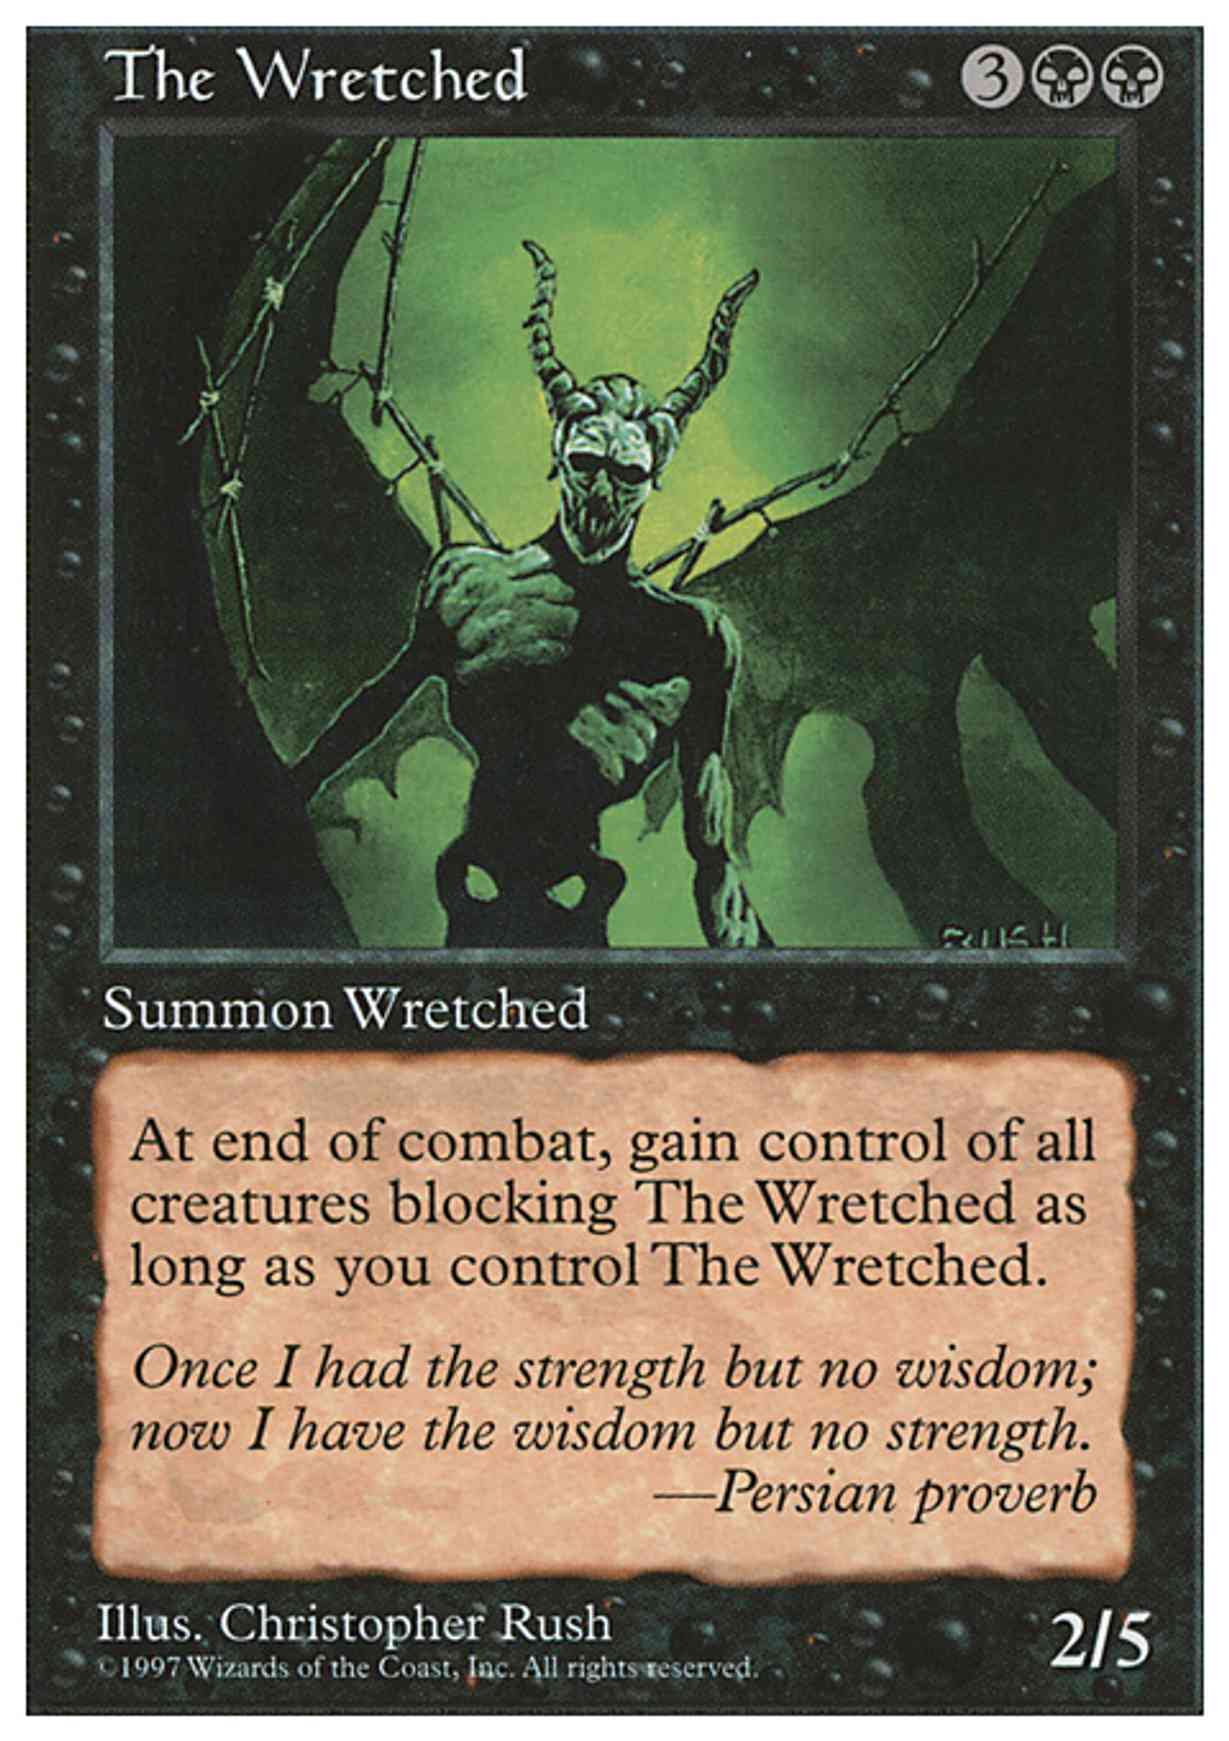 The Wretched magic card front